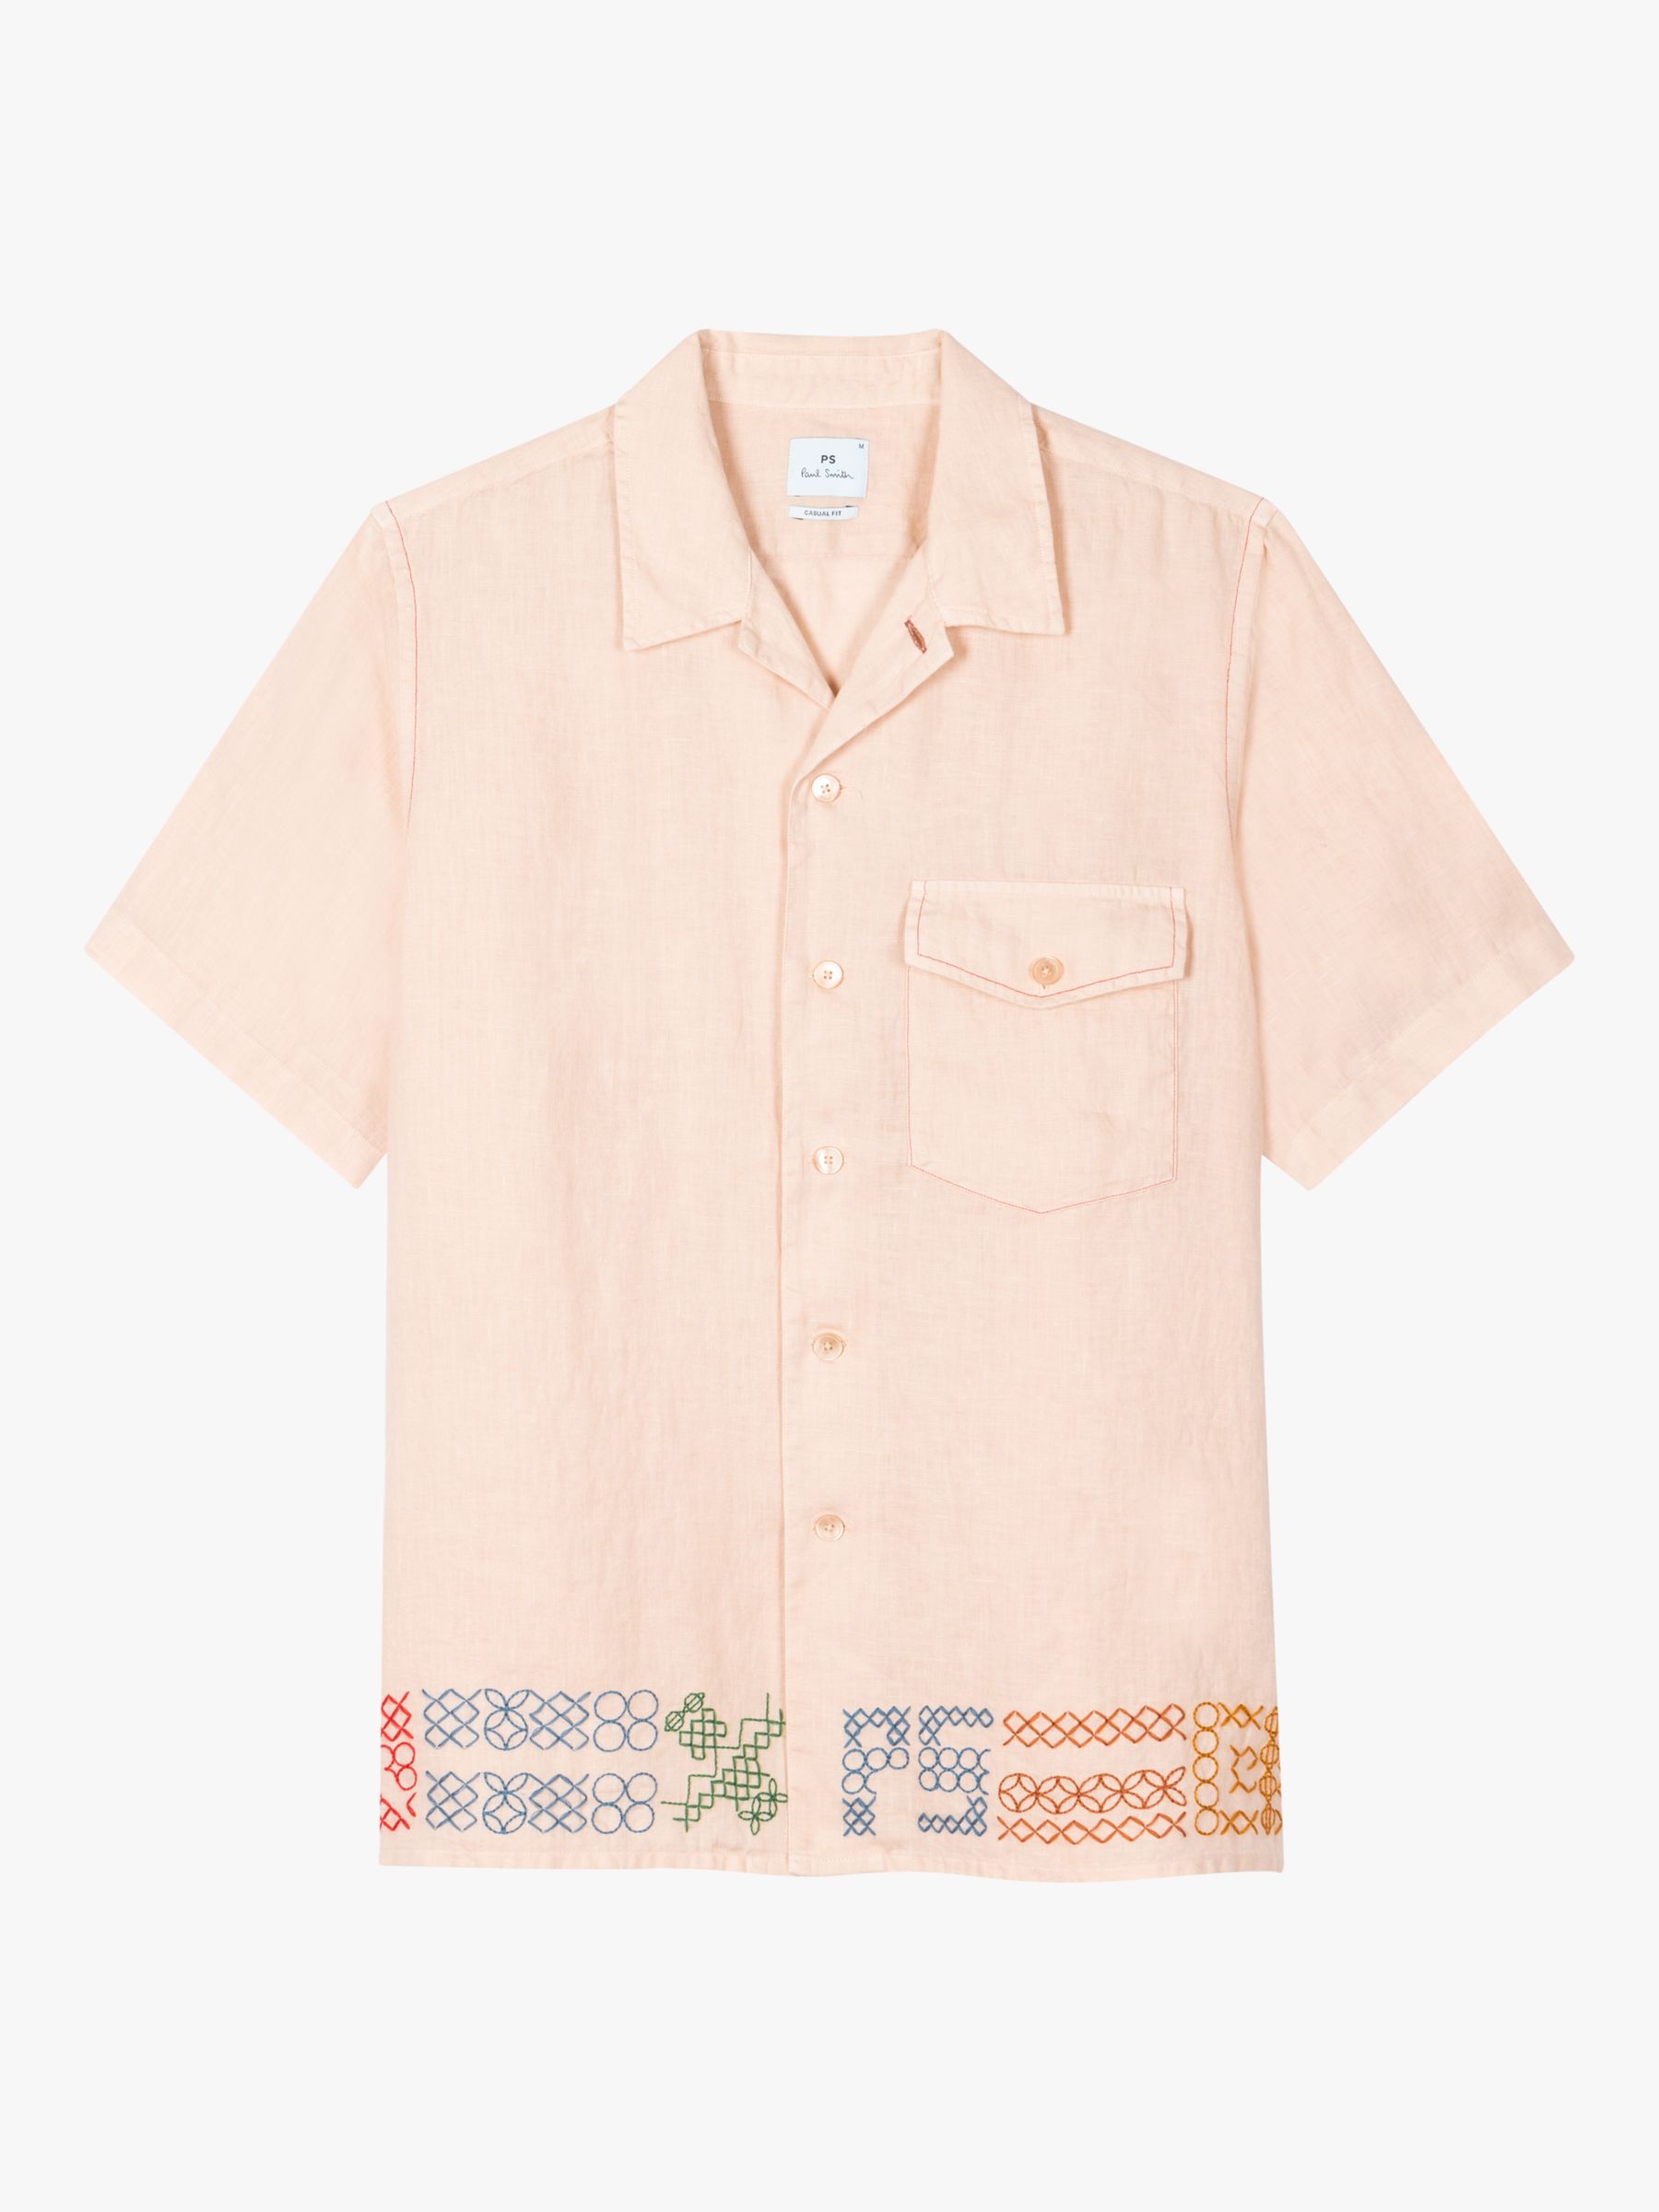 Paul Smith Short Sleeve Causal Fit Embroidery Shirt, Brown, M